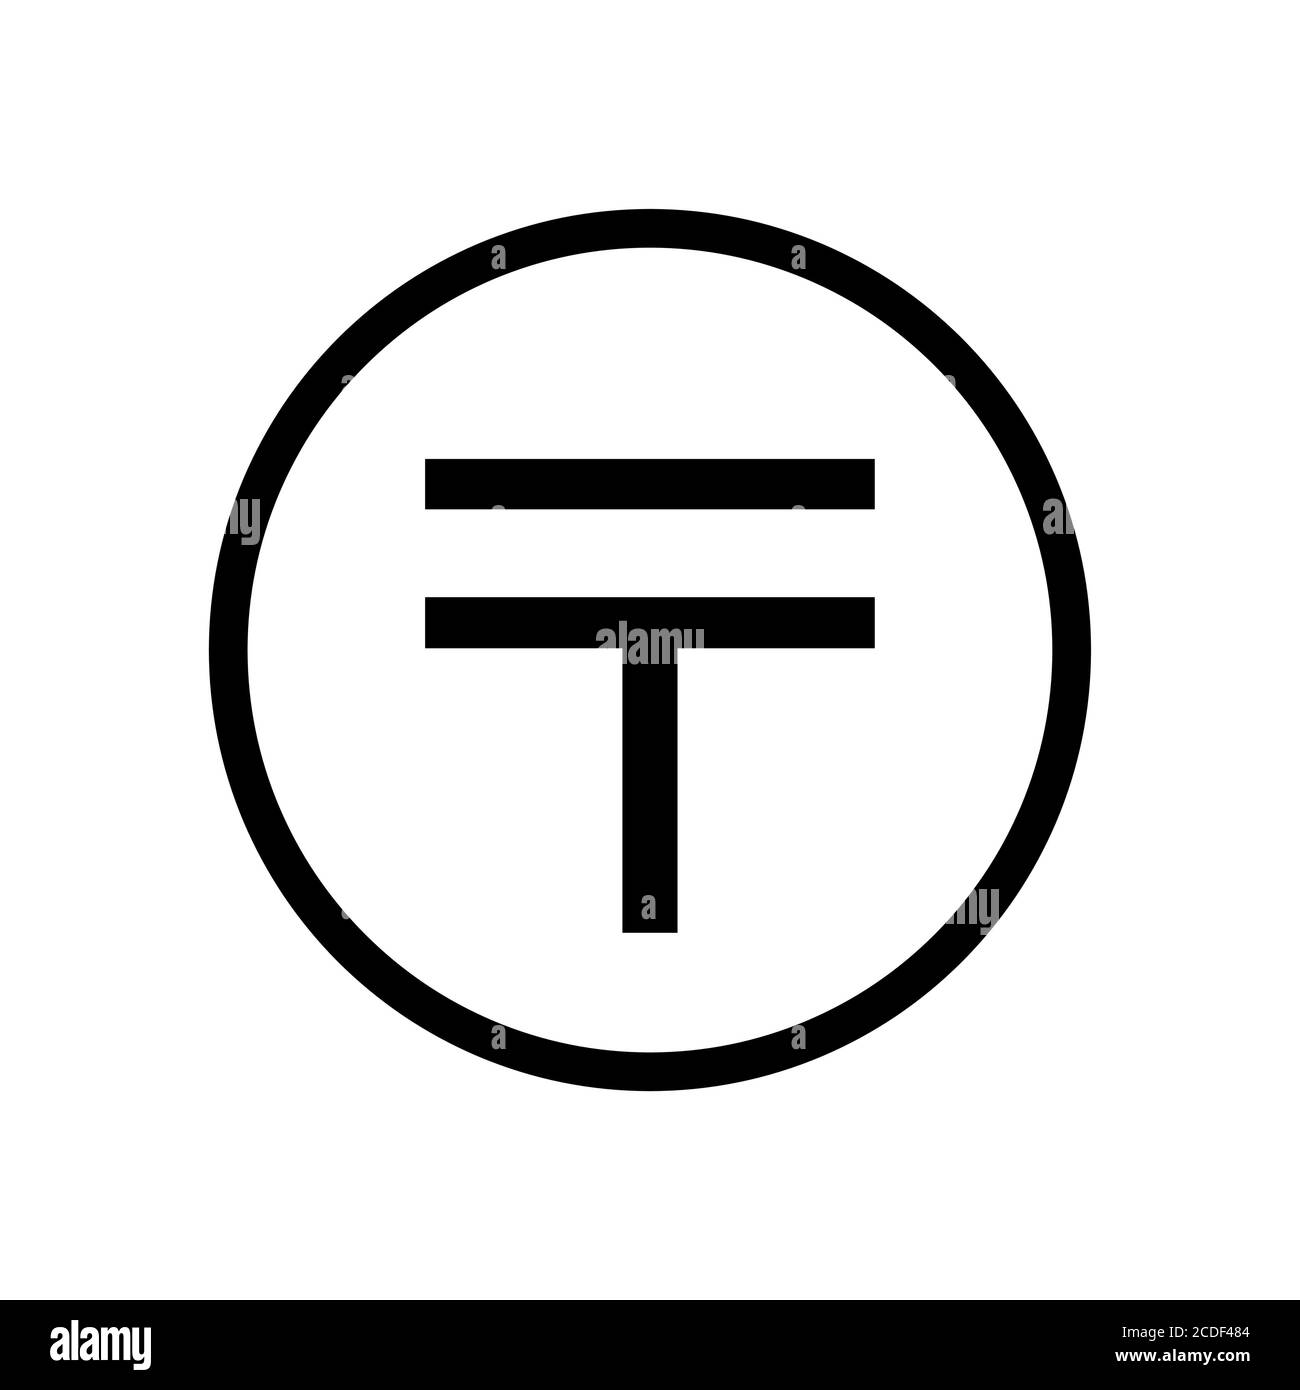 Kazakhstan Tenge icon coin monochrome black and white icon. Current currency symbol. Stock Vector